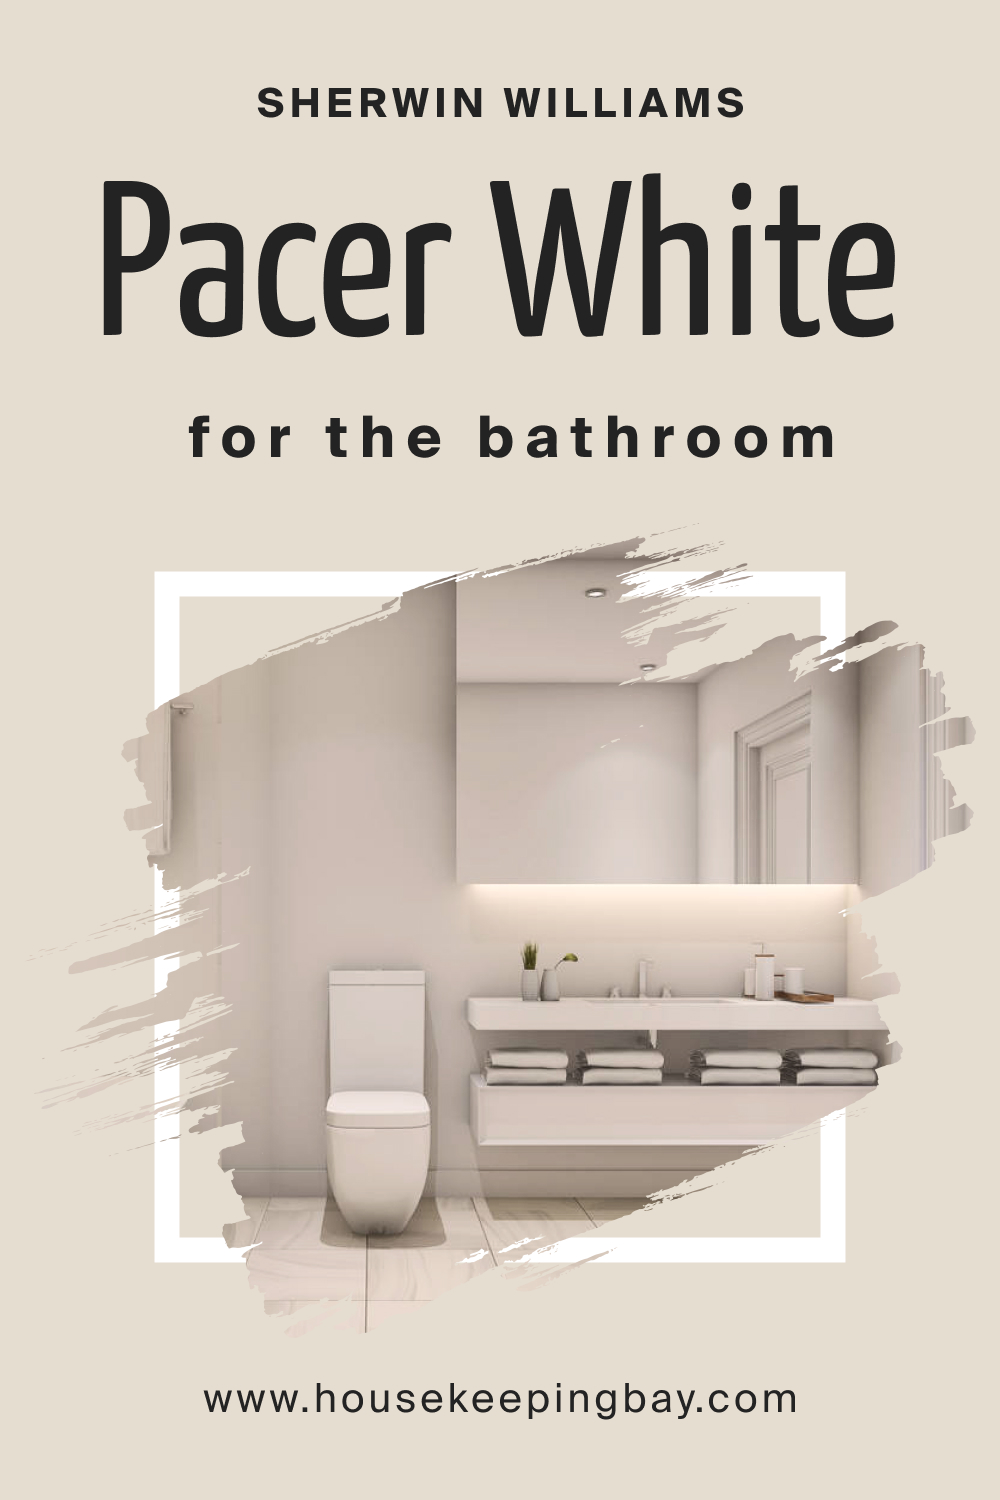 Sherwin Williams. SW Pacer White in the Bathroom